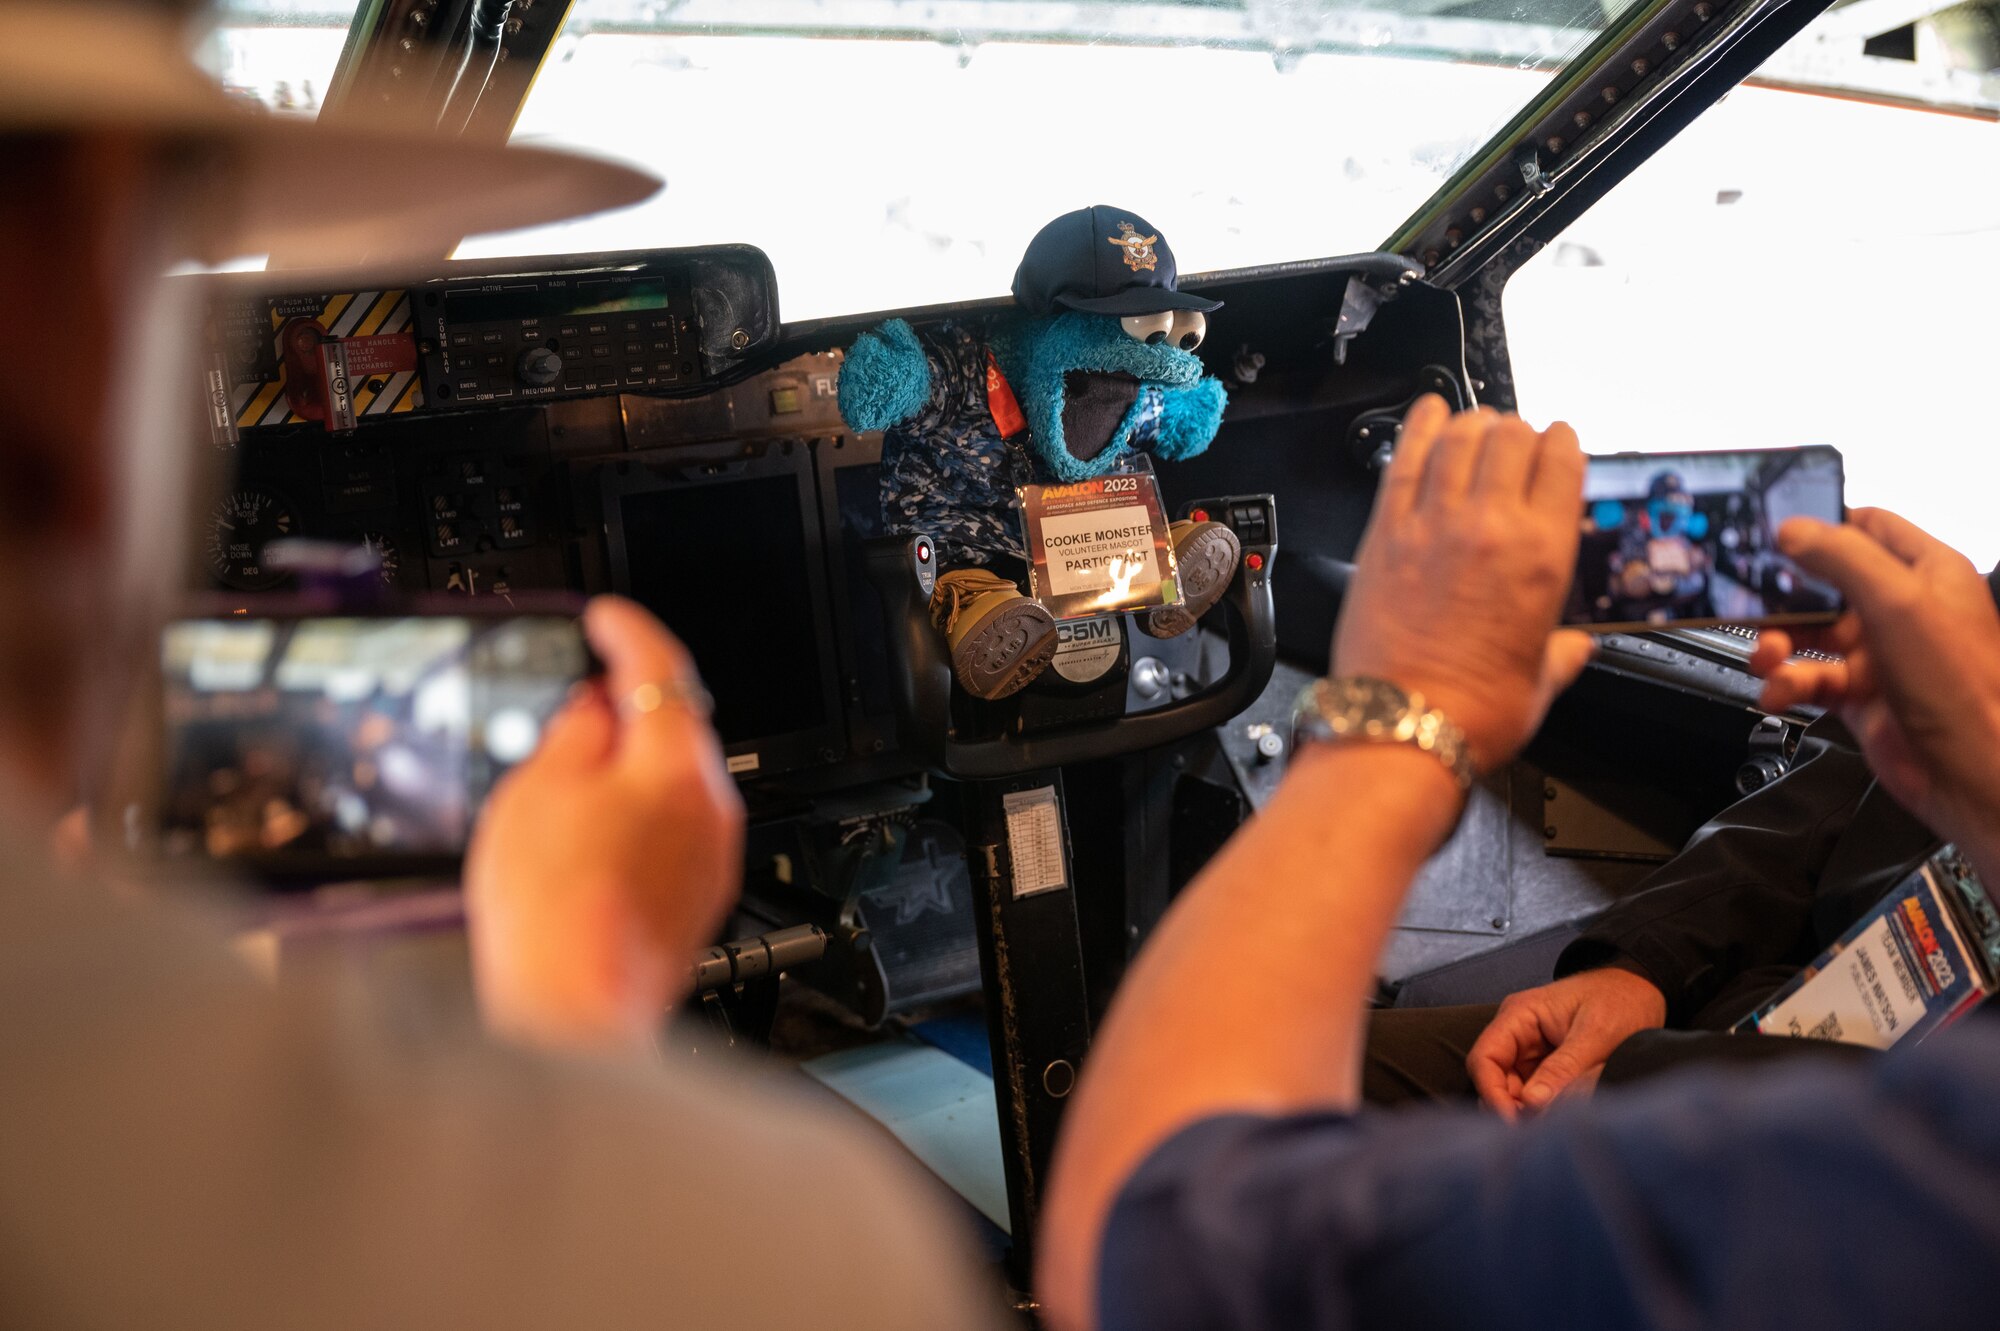 Event volunteers take photos of Cookie Monster—the event mascot—sitting in the cockpit of the C-5 Galaxy during the 2023 Australian International Airshow and Aerospace & Defence Exposition—AVALON 23—at Avalon International Airport, March 1, 2023. The Department of Defense supported AVALON 23 with approximately 300 personnel and a number of various aircraft to include the F-22 Raptor, KC-46 Pegasus, C-17 Globemaster III, AH-64 Apache, M142 HIMARS among many others. The C-5 Galaxy is a strategic transport aircraft and is the largest aircraft in the U.S. Air Force inventory. (U.S. Air Force photo by Tech. Sgt. Hailey Haux)